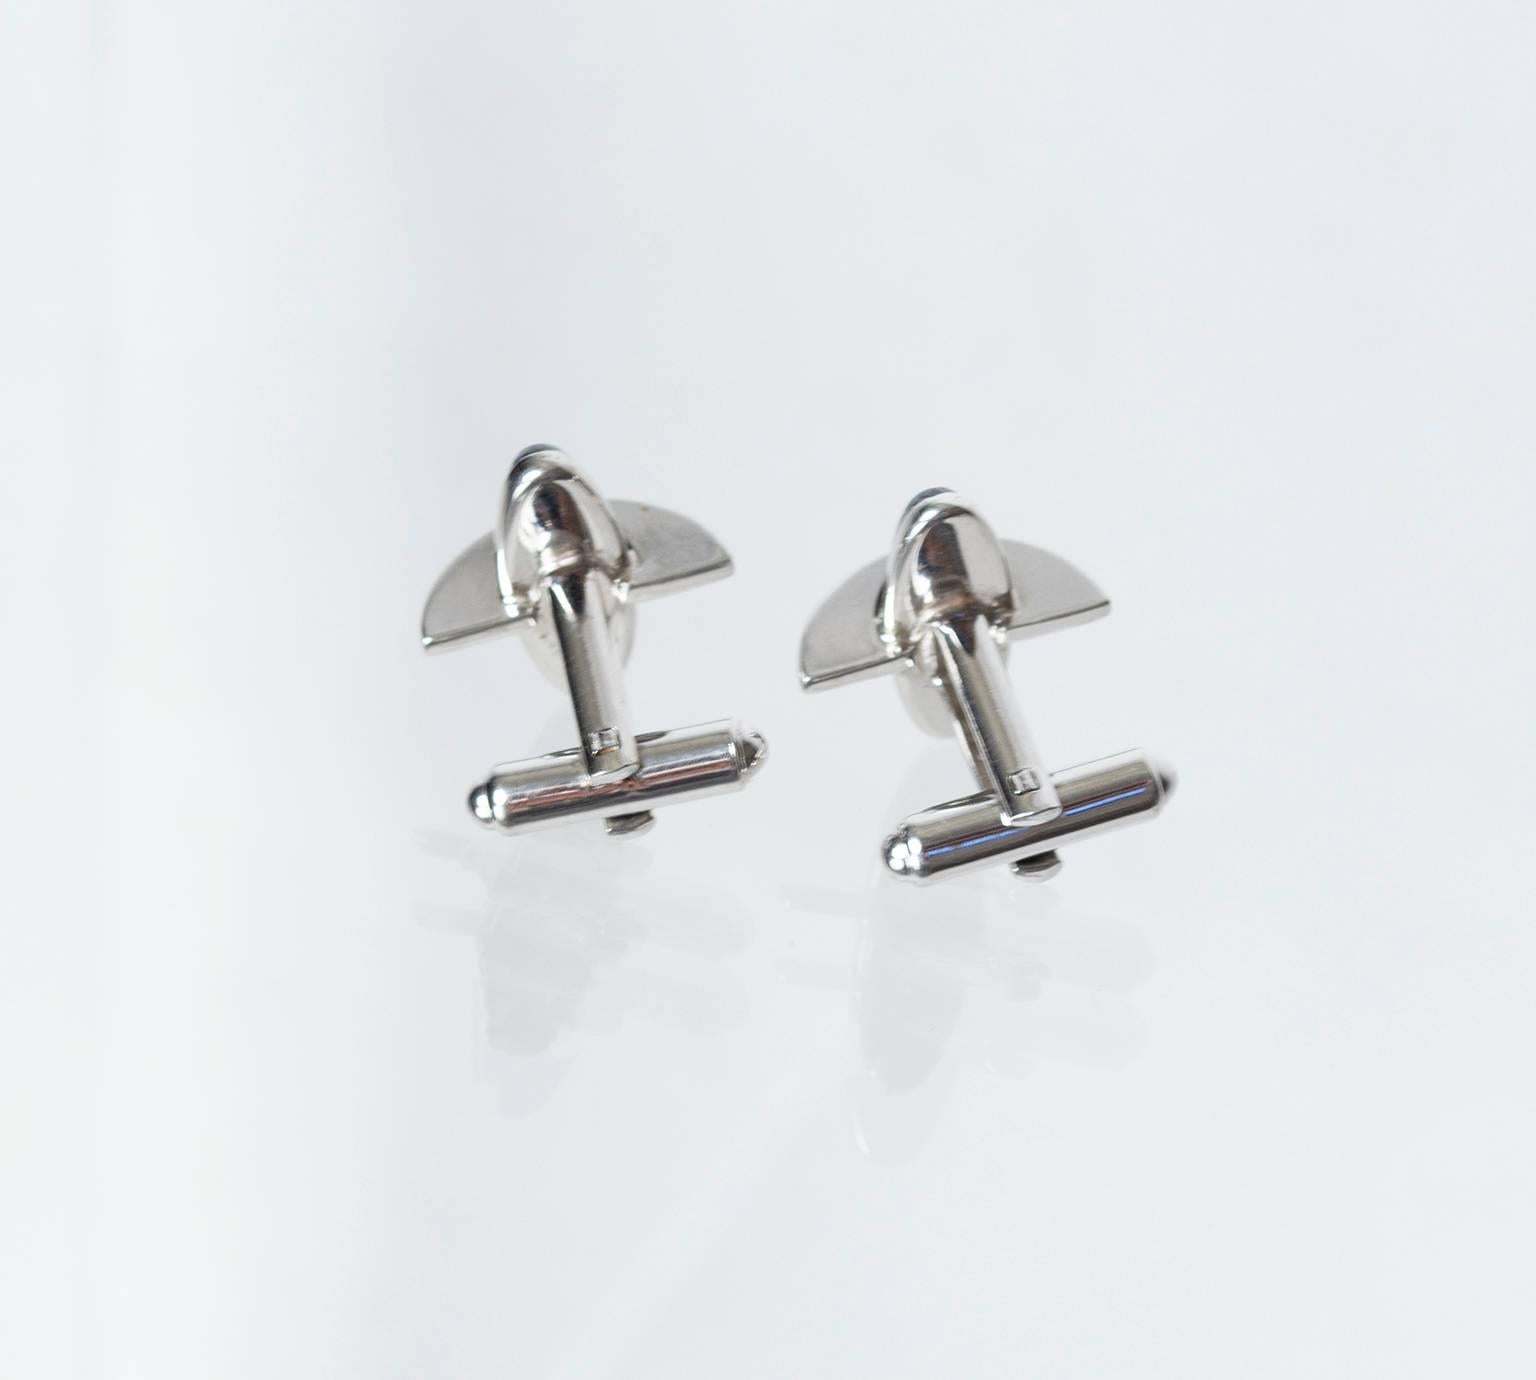 Men's Hickock Atomic Age Elliptical Silver Cuff Links, 1950s